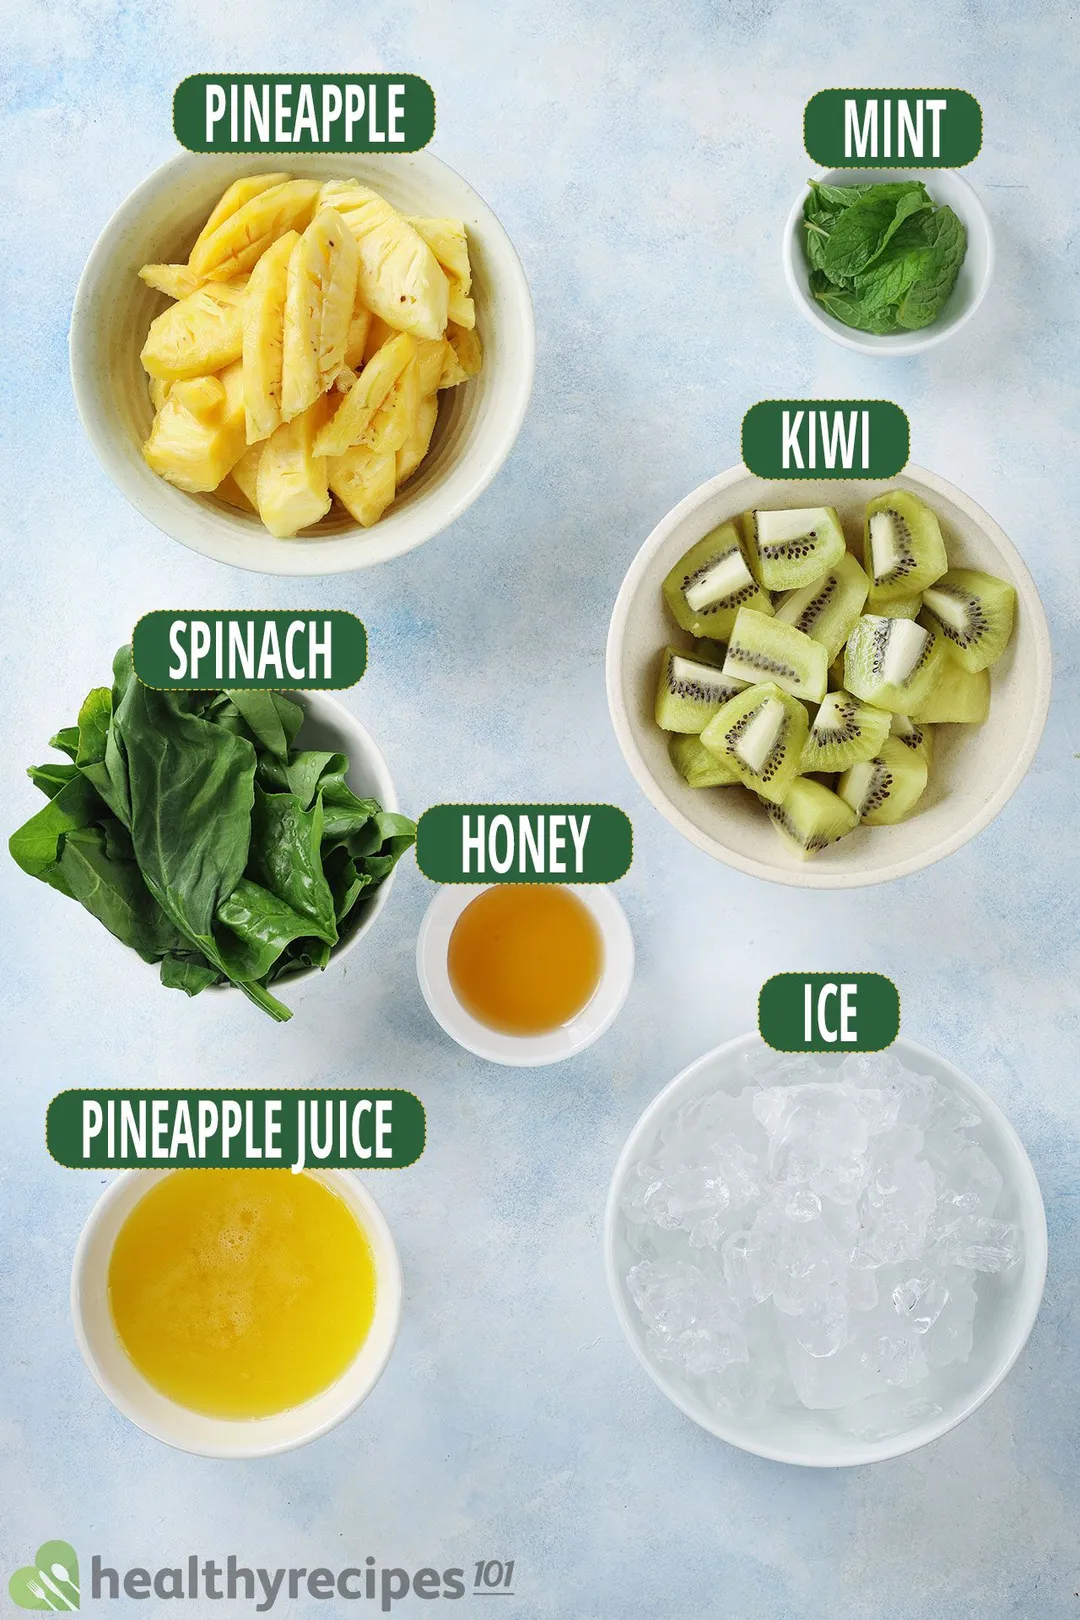 Ingredients for Pineapple Kiwi Smoothie, including bowls of pineapple slices, green kiwi slices, spinach, ice, and other smoothie essentials.